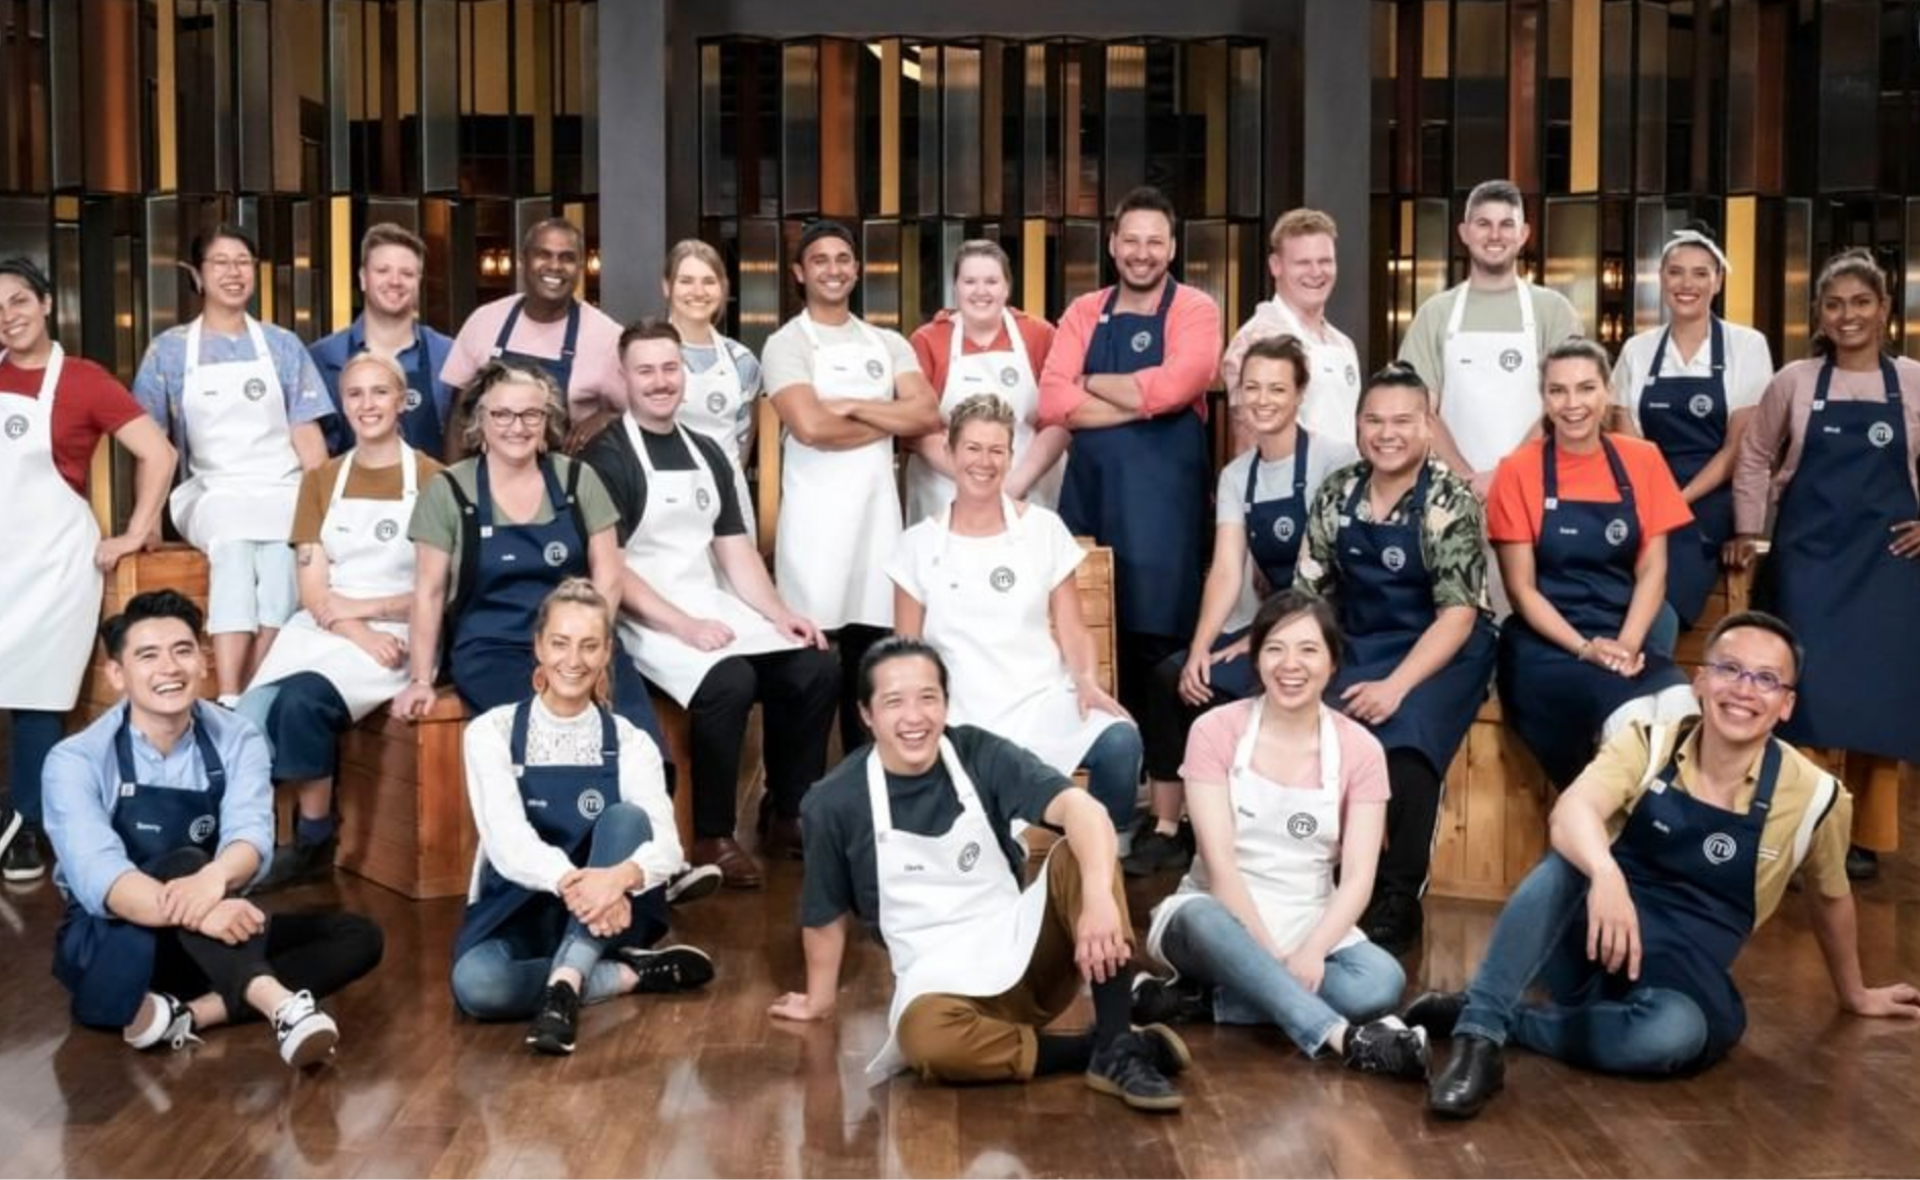 They’re out! A comprehensive list of the contestants who’ve left MasterChef Australia 2022